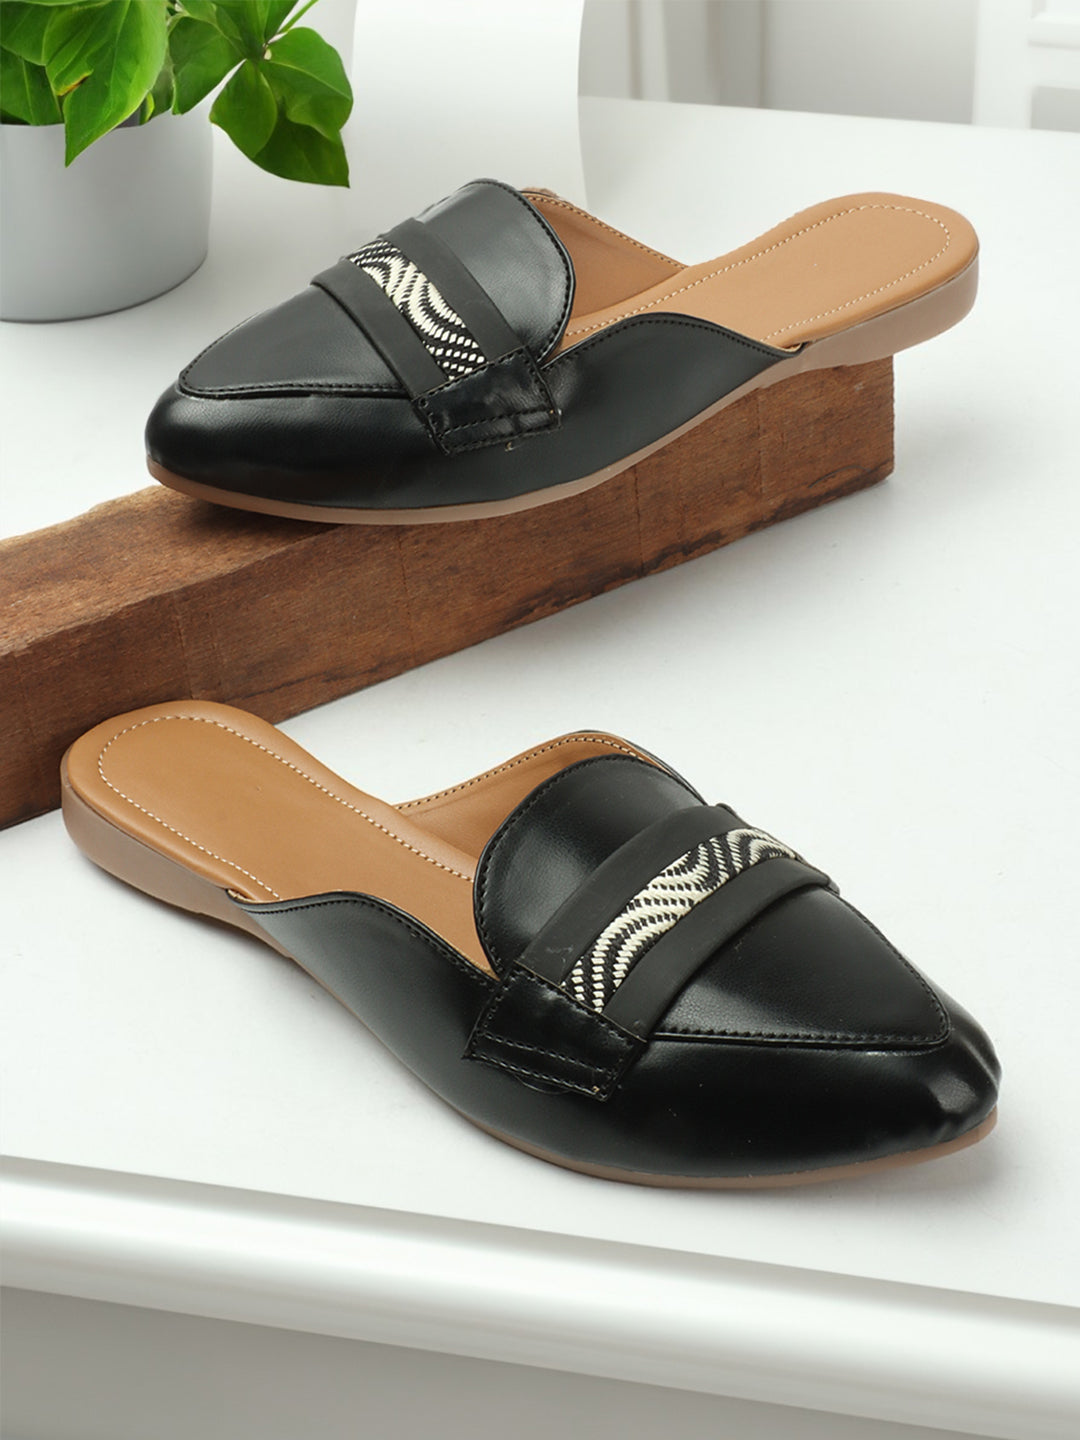 Black mules with a chic white strap, stepping into timeless style